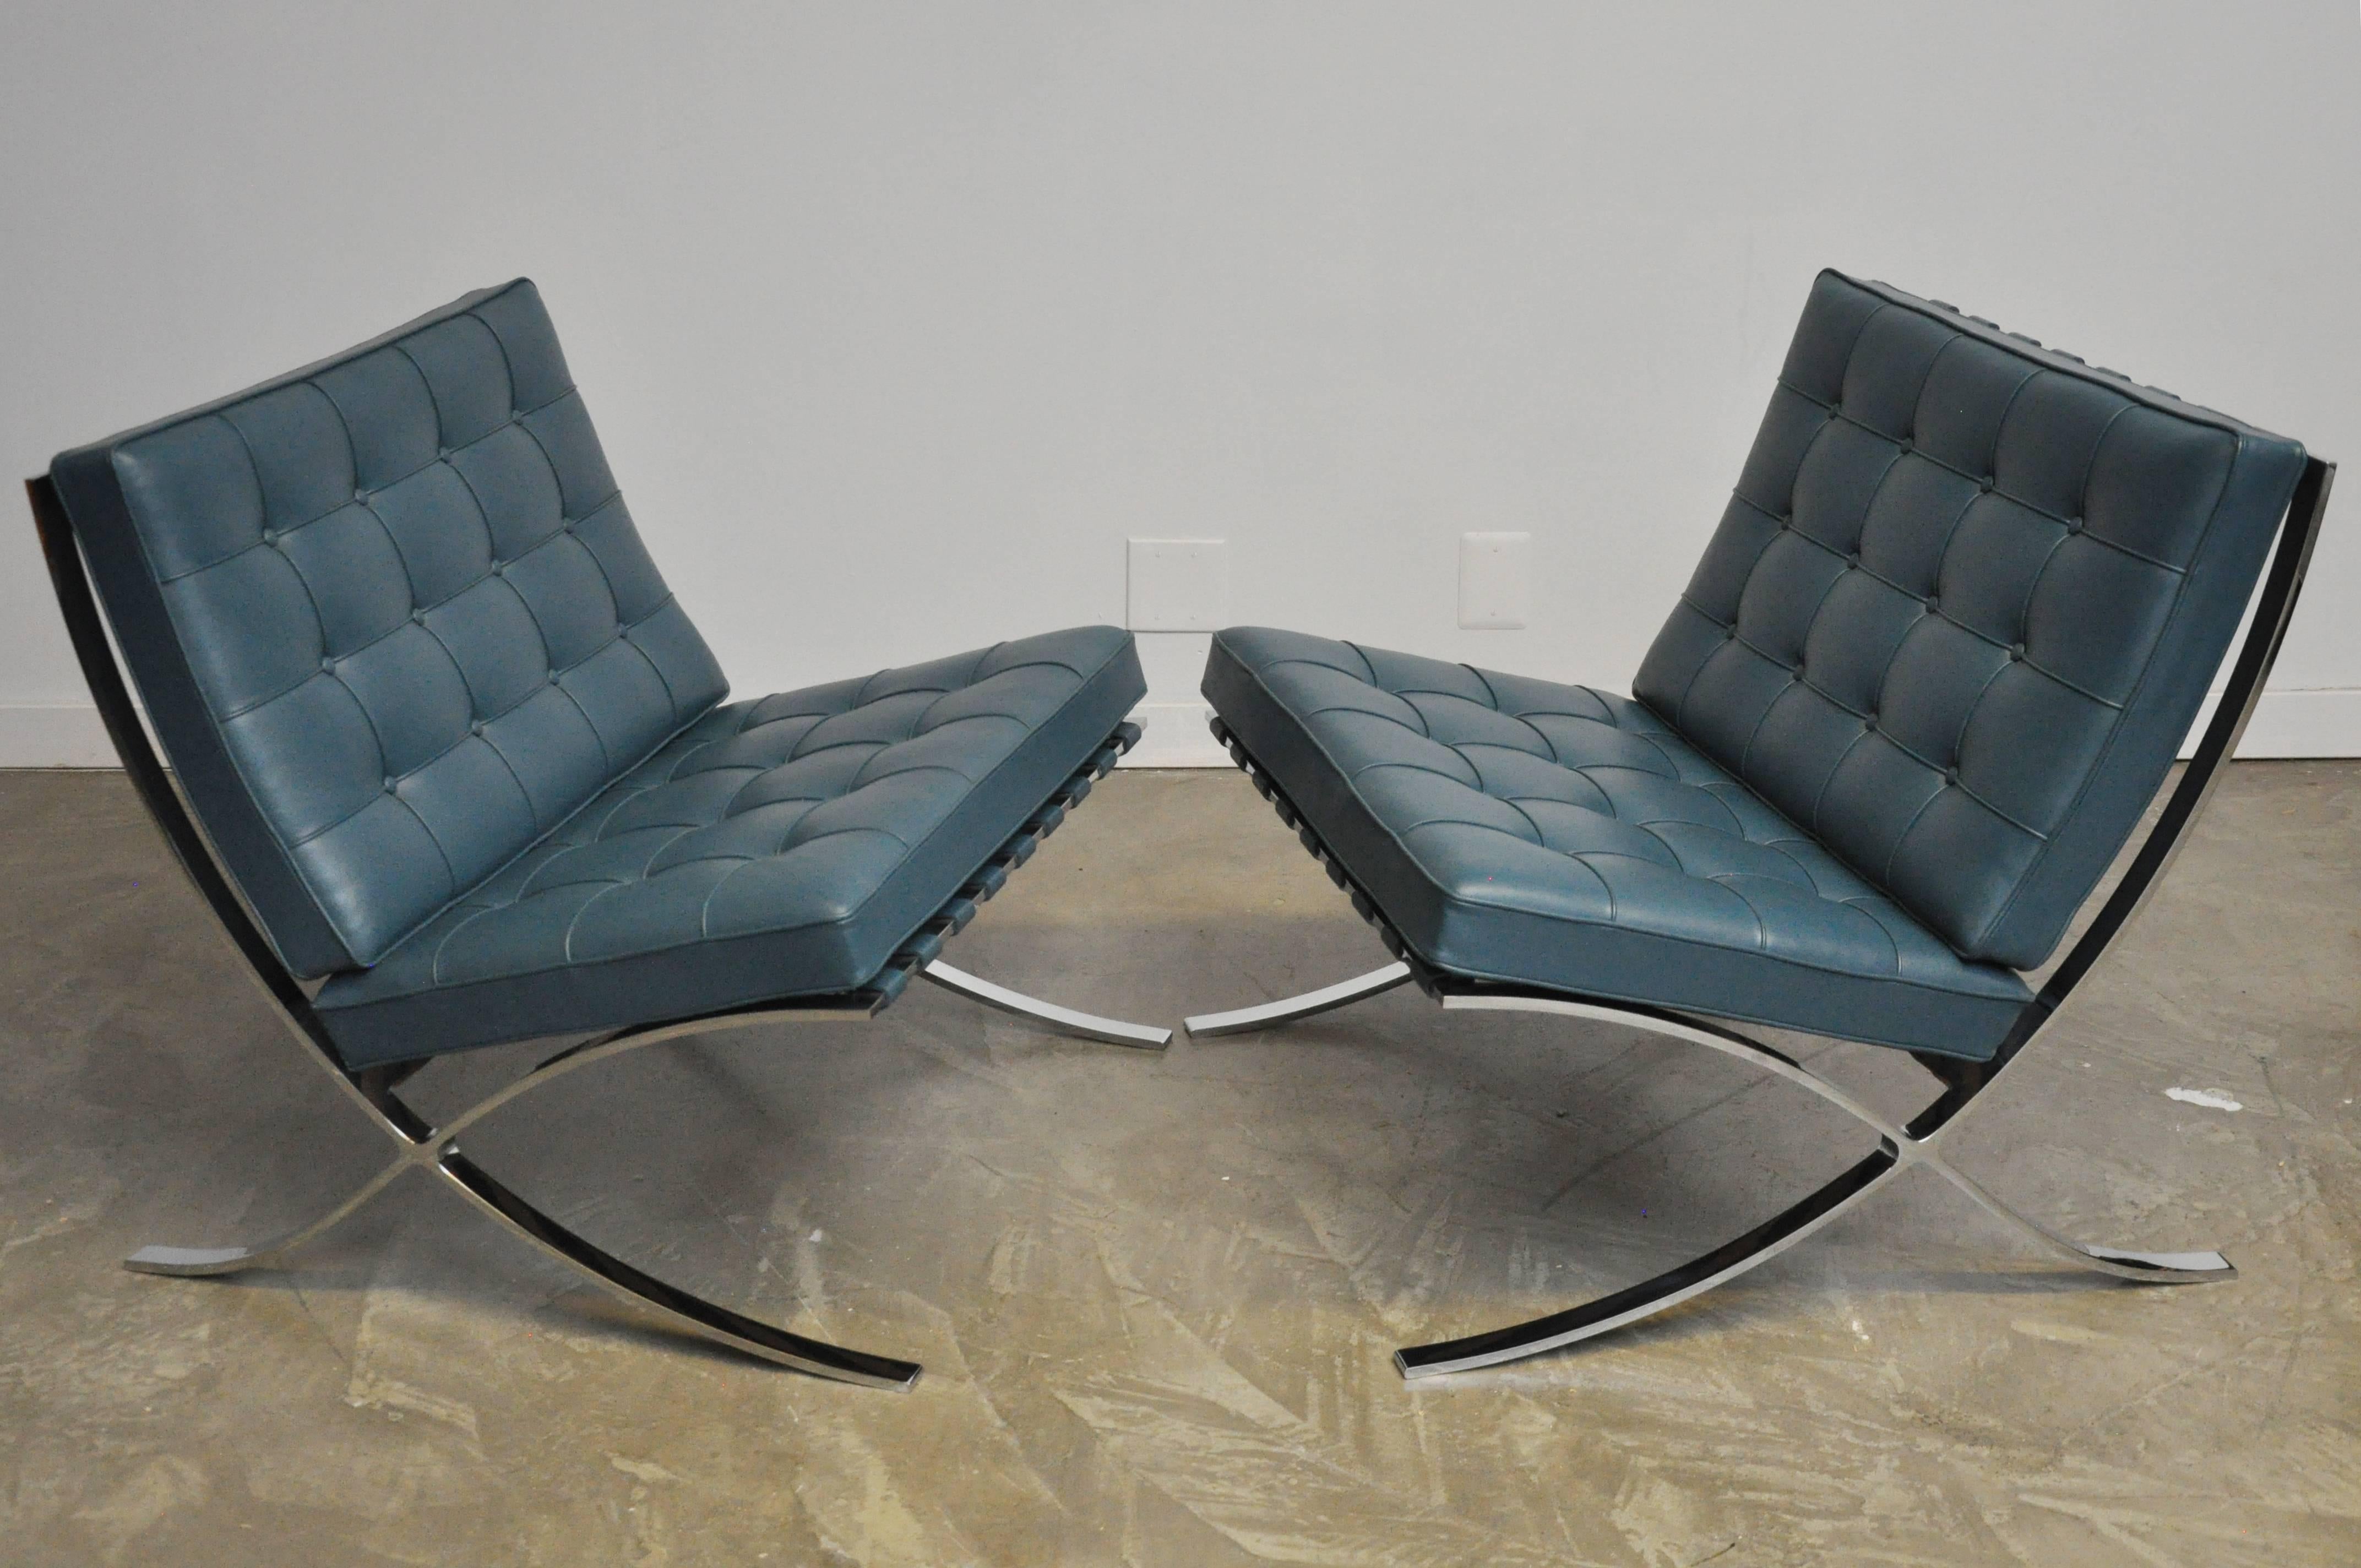 Custom ordered blue or teal leather Barcelona chairs by Ludwig Mies van der Rohe. Knoll production circa 1990s. Leather is beautiful. We have never seen another in this color.